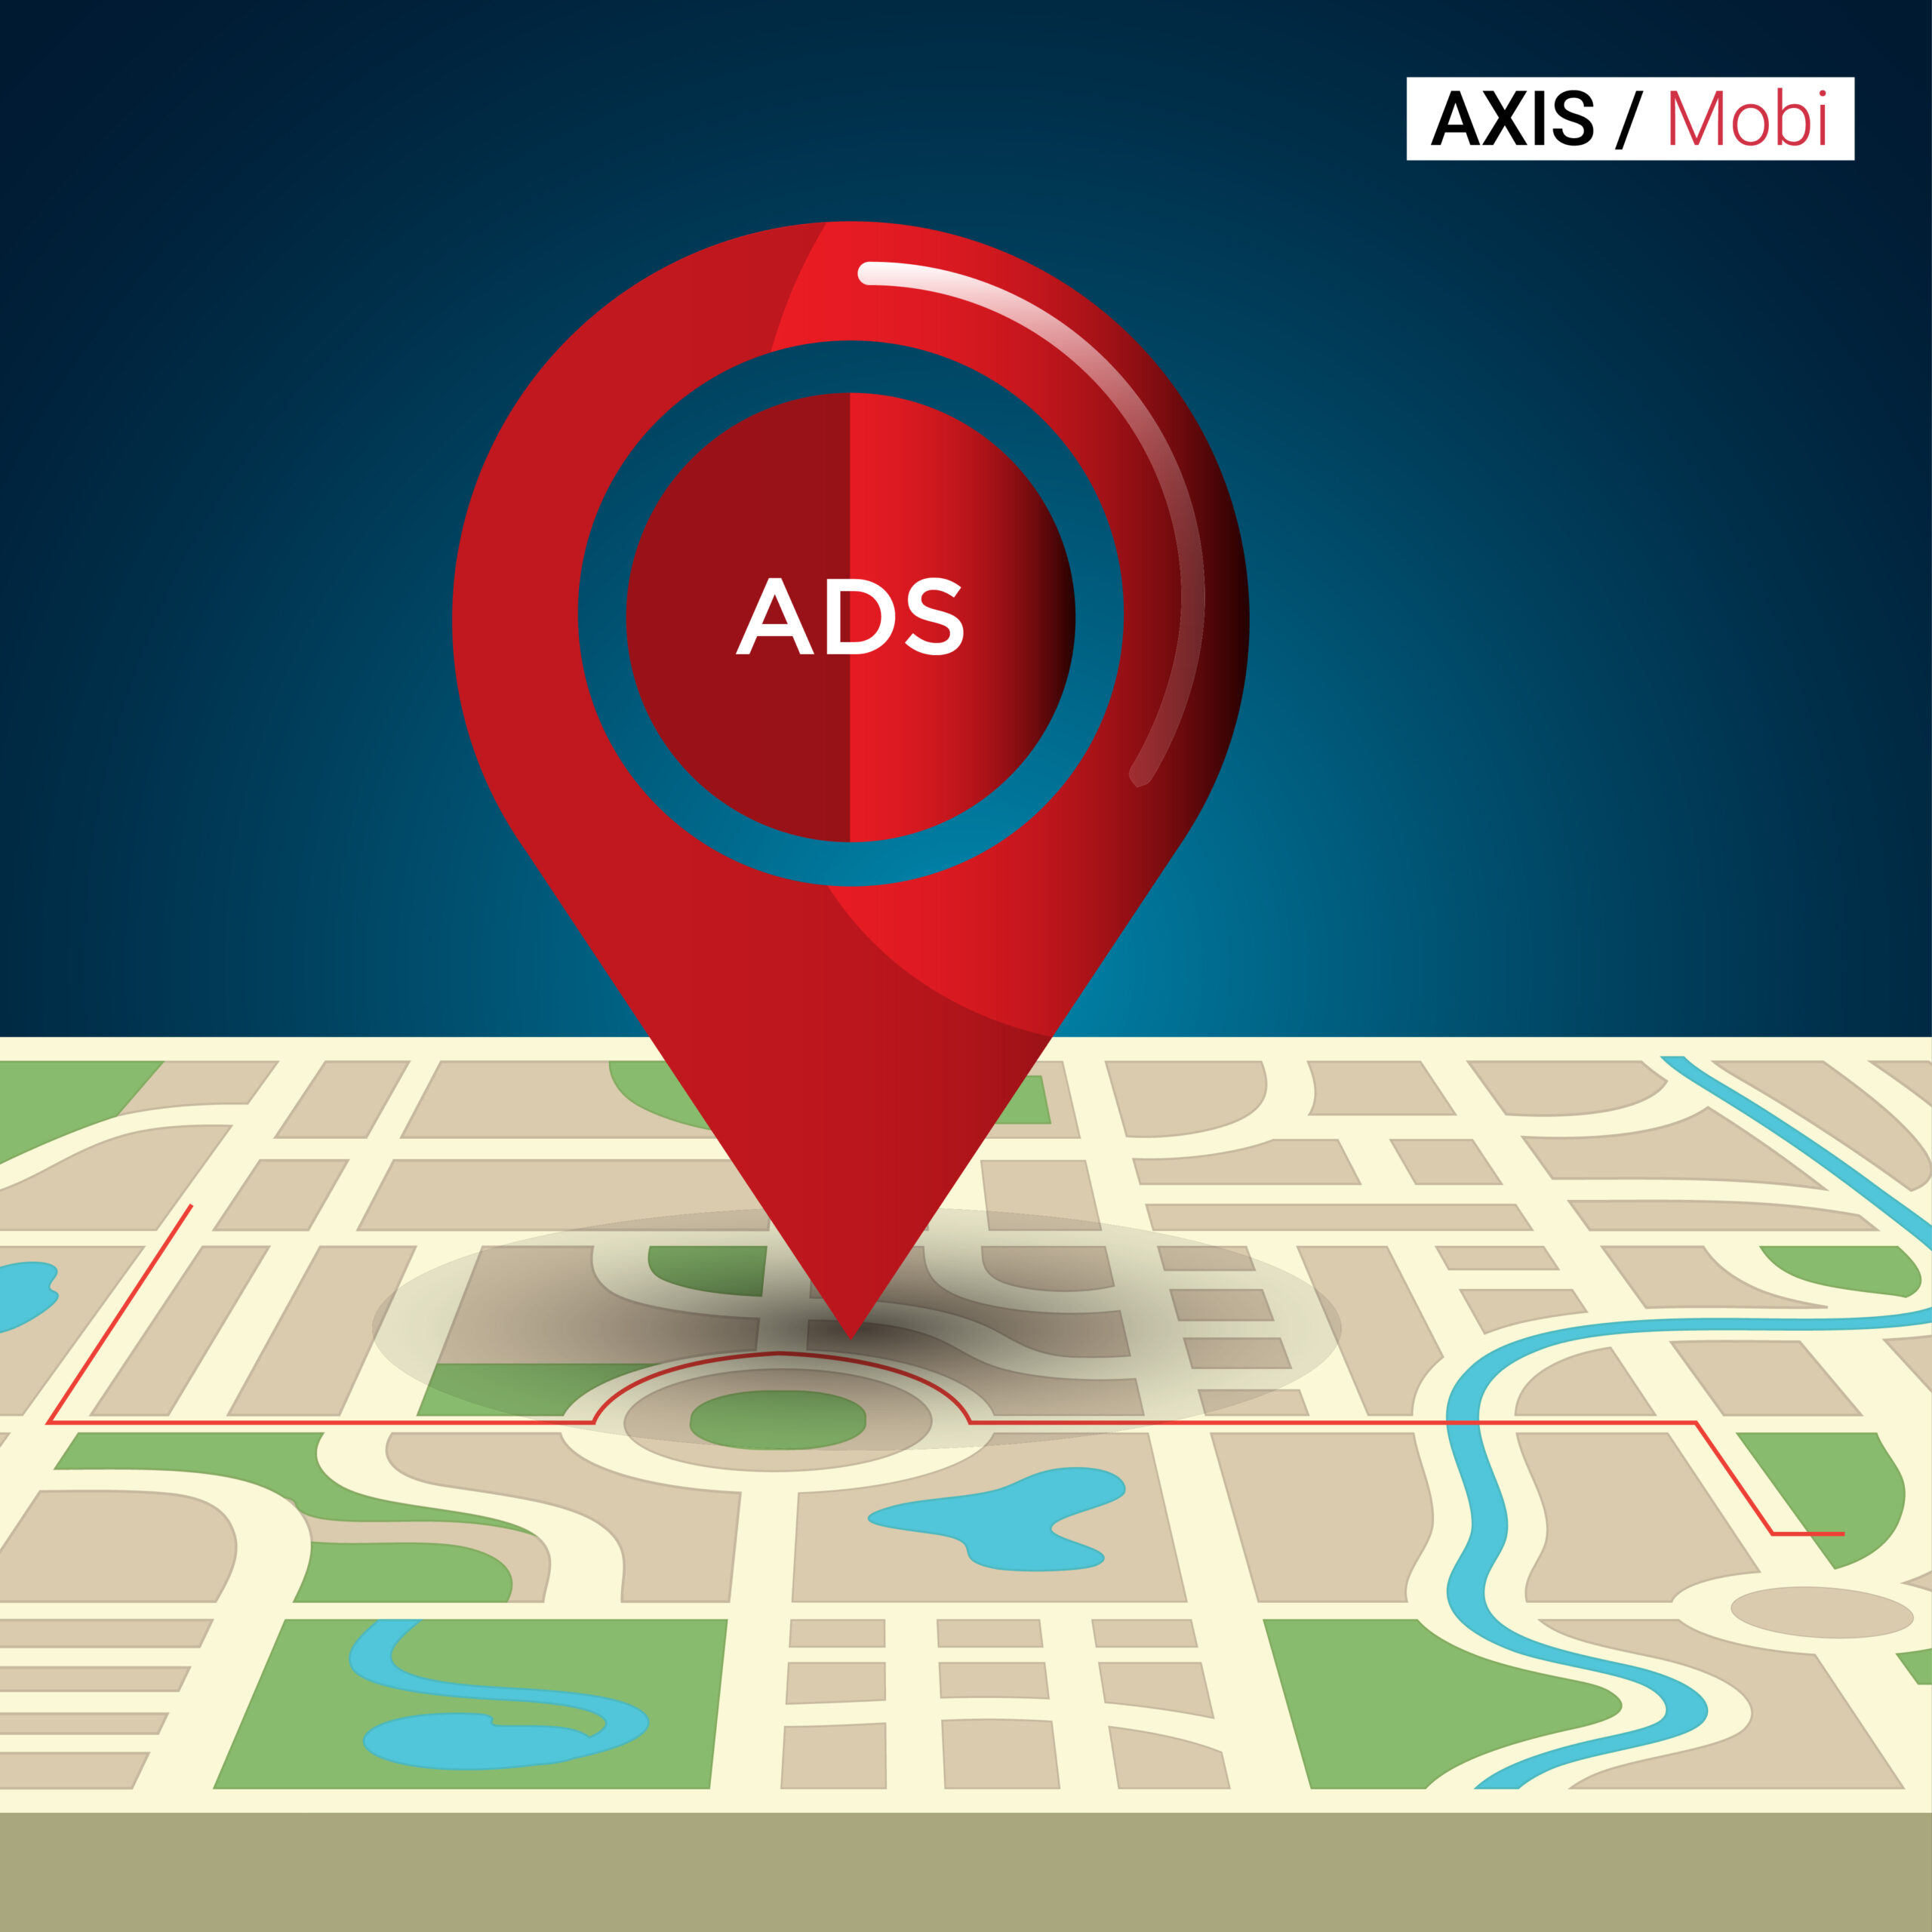 Location Targeted Mobile Ads